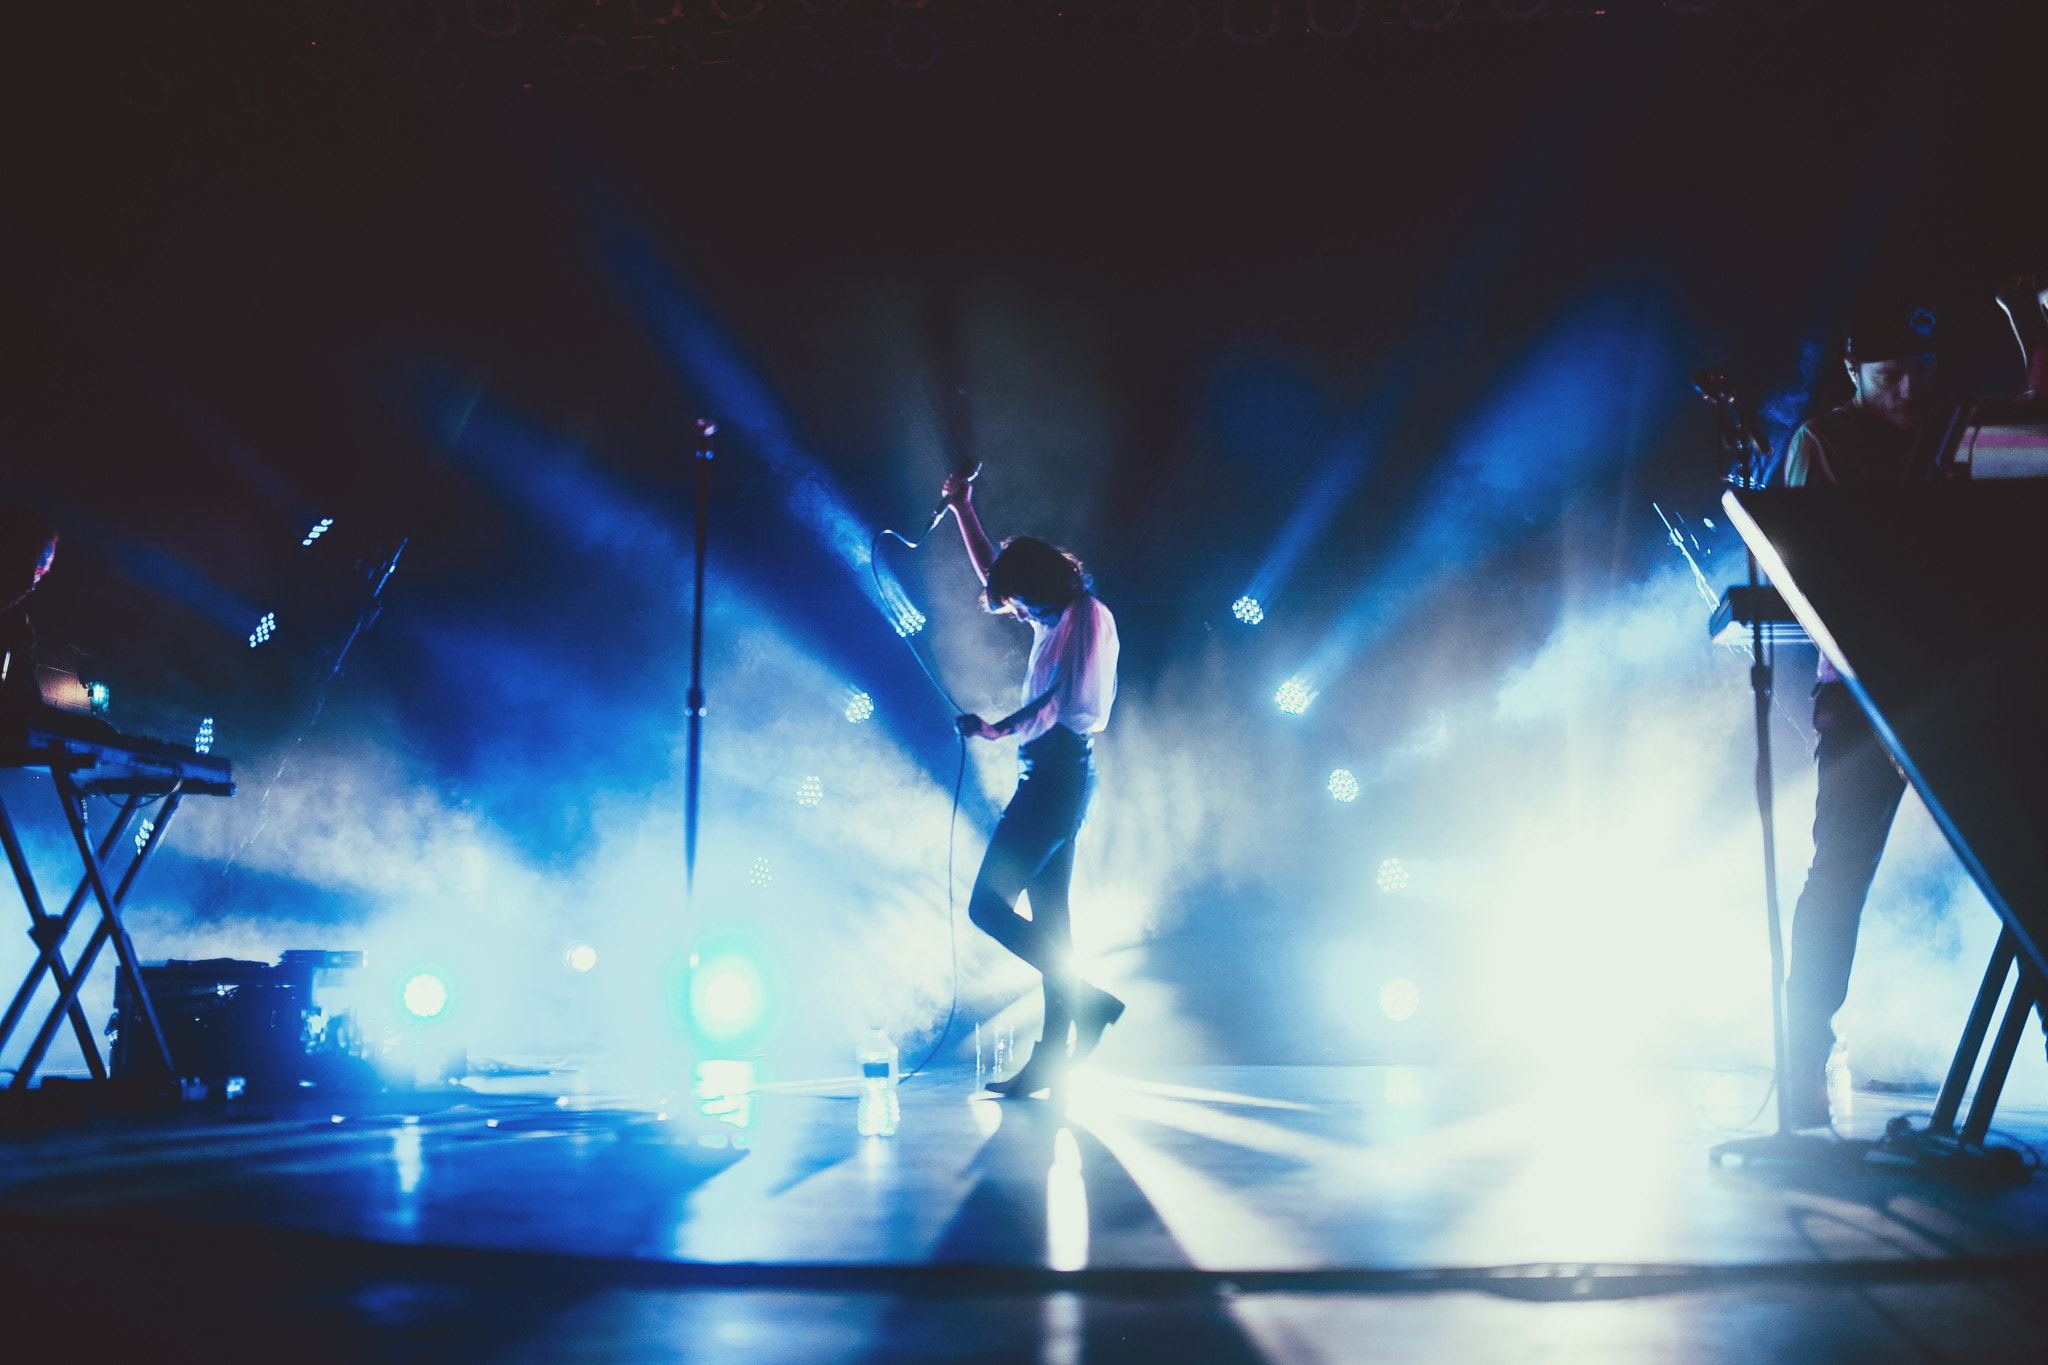 Concerts Silhouette Lauren Mayberry Chvrches Stages Stage Shots Stage Light Singer Musician Band 2048x1365